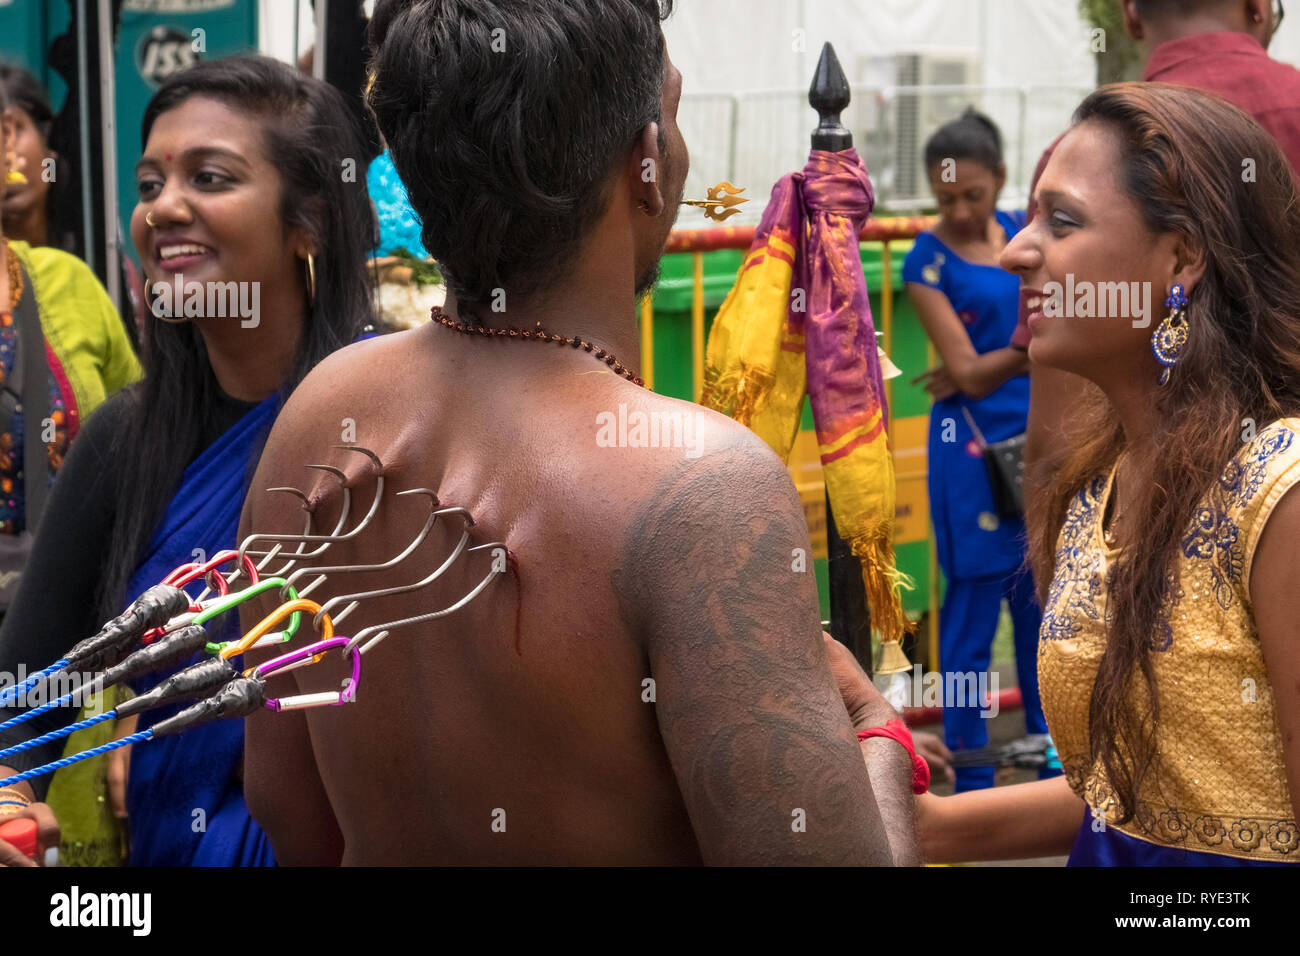 Large hooks pierced into devotee's back, with smiling girls - Thaipusam festival - Singapore Stock Photo